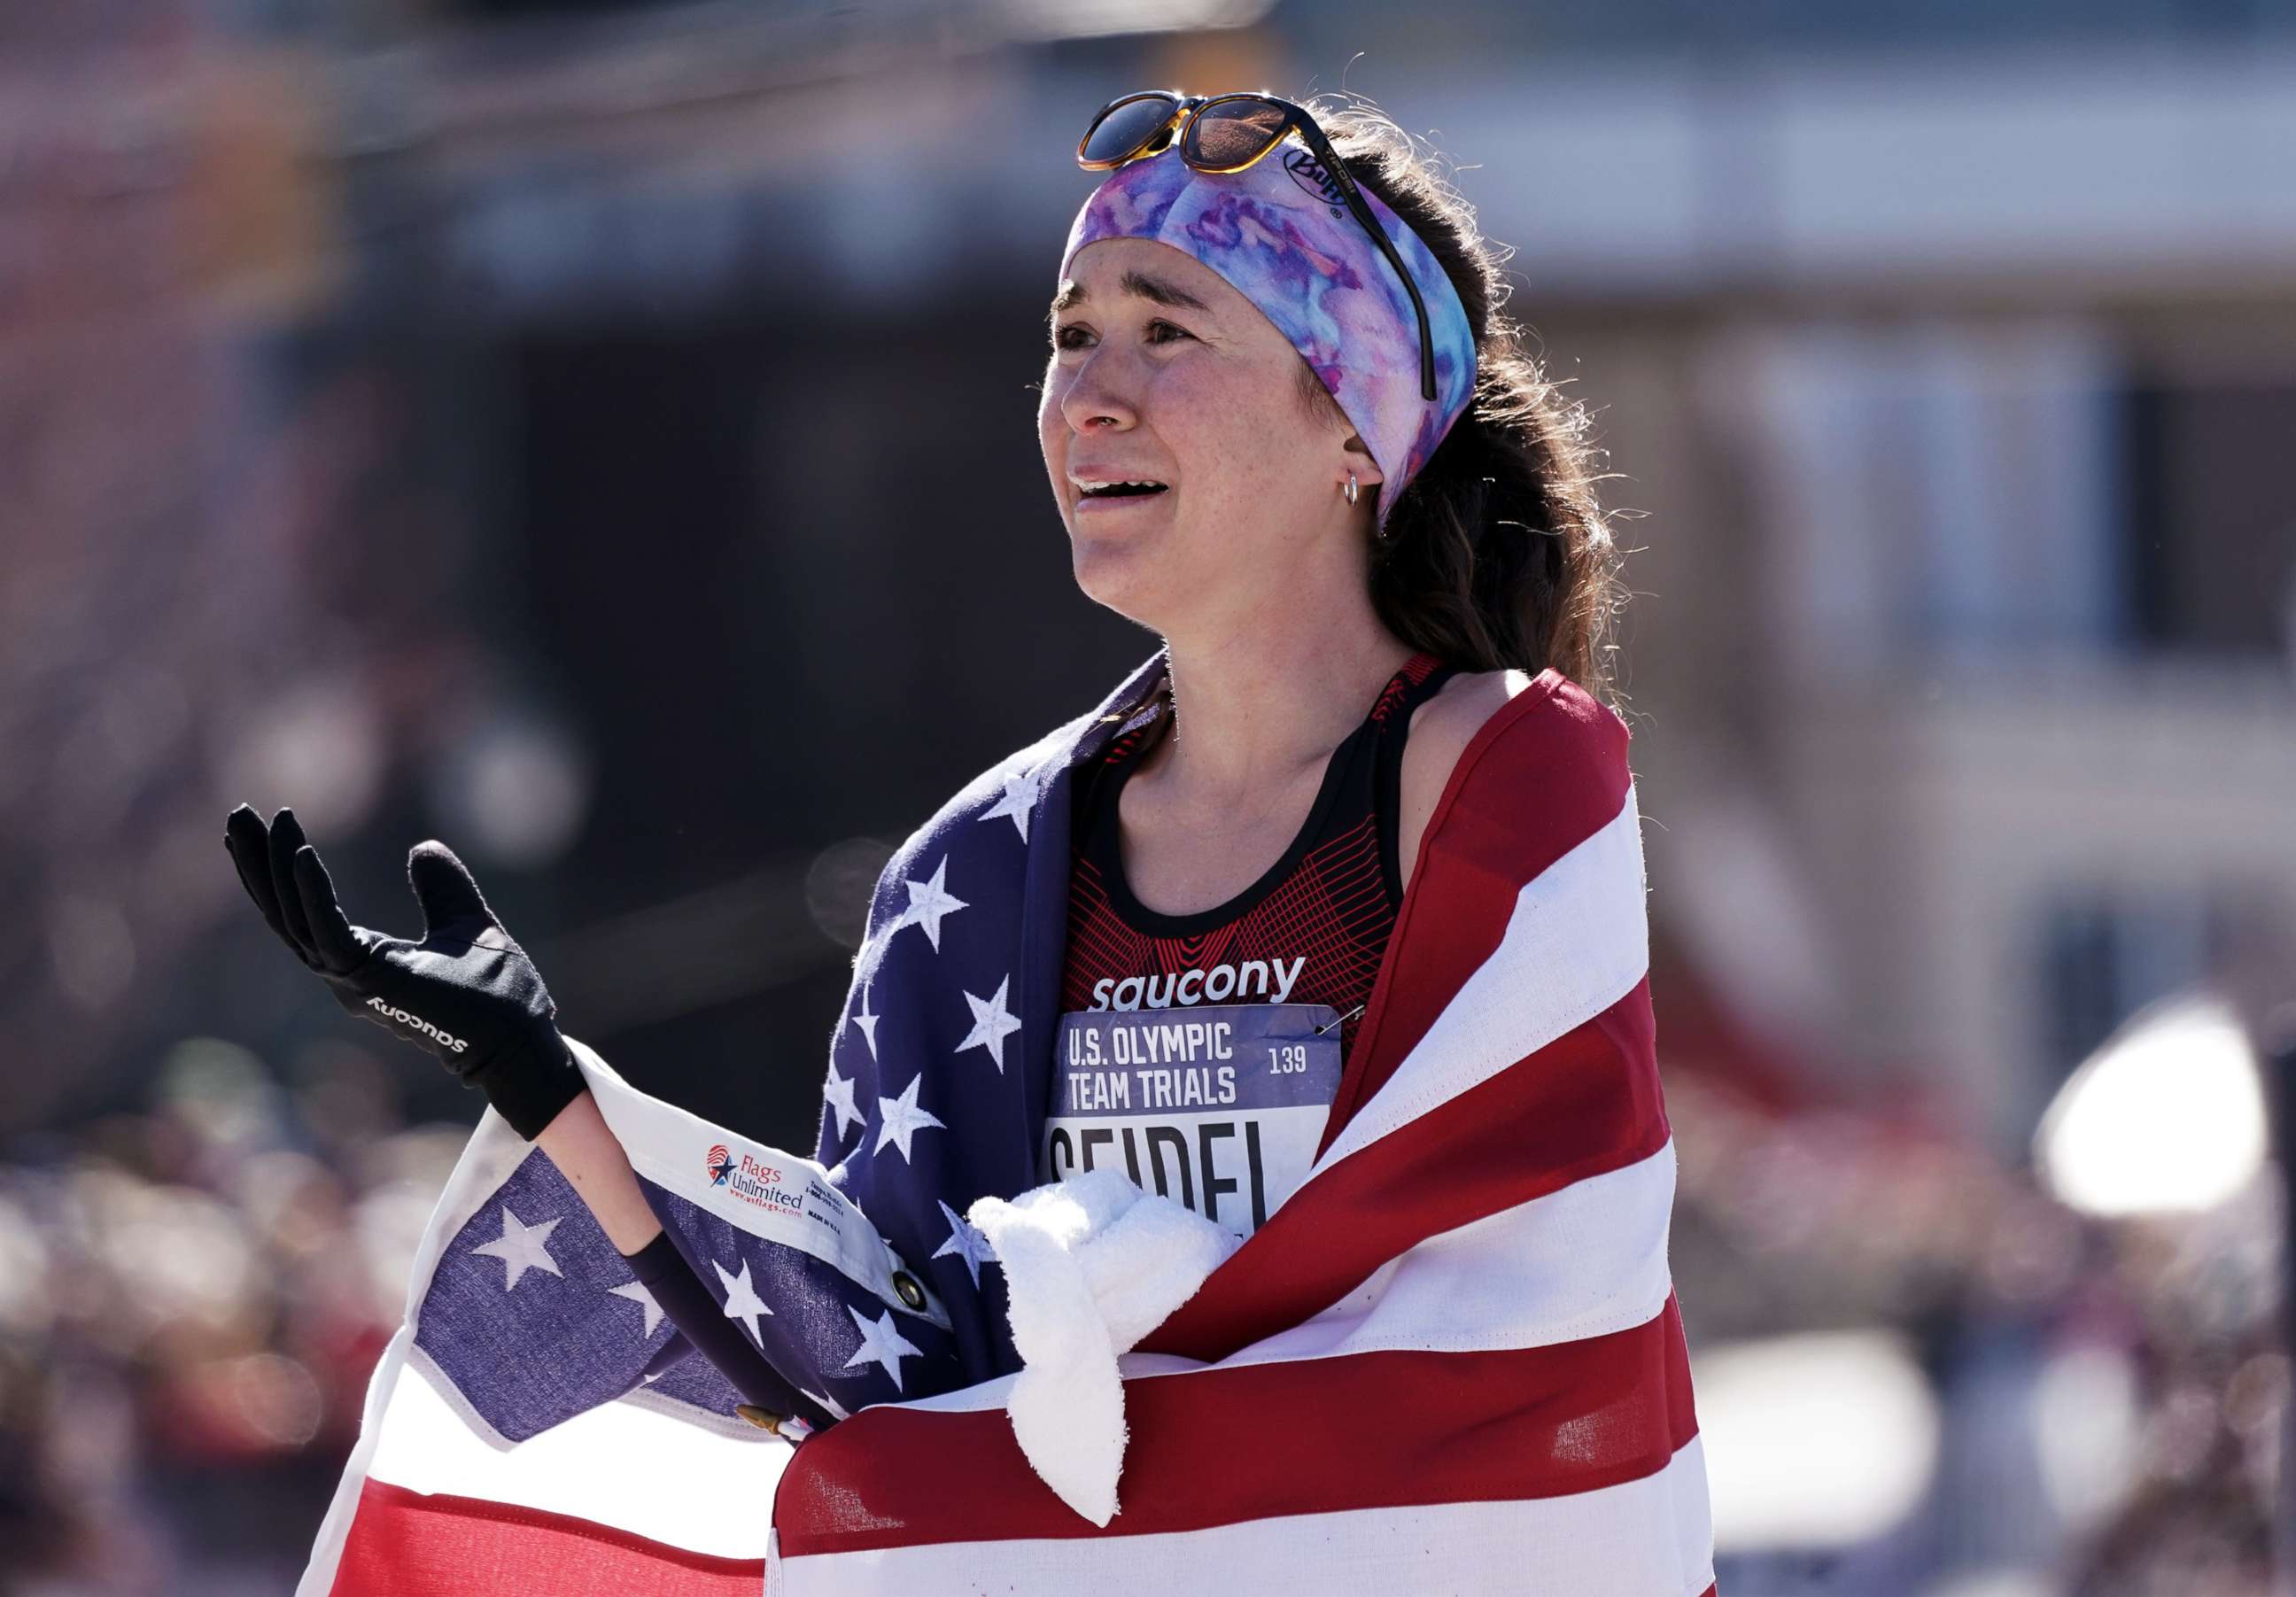 PHOTO: Molly Seidel celebrates after placing second in the women's race in 2:27:31 during the U.S. Olympic Team Trials marathon in Atlanta, Feb. 29, 2020.